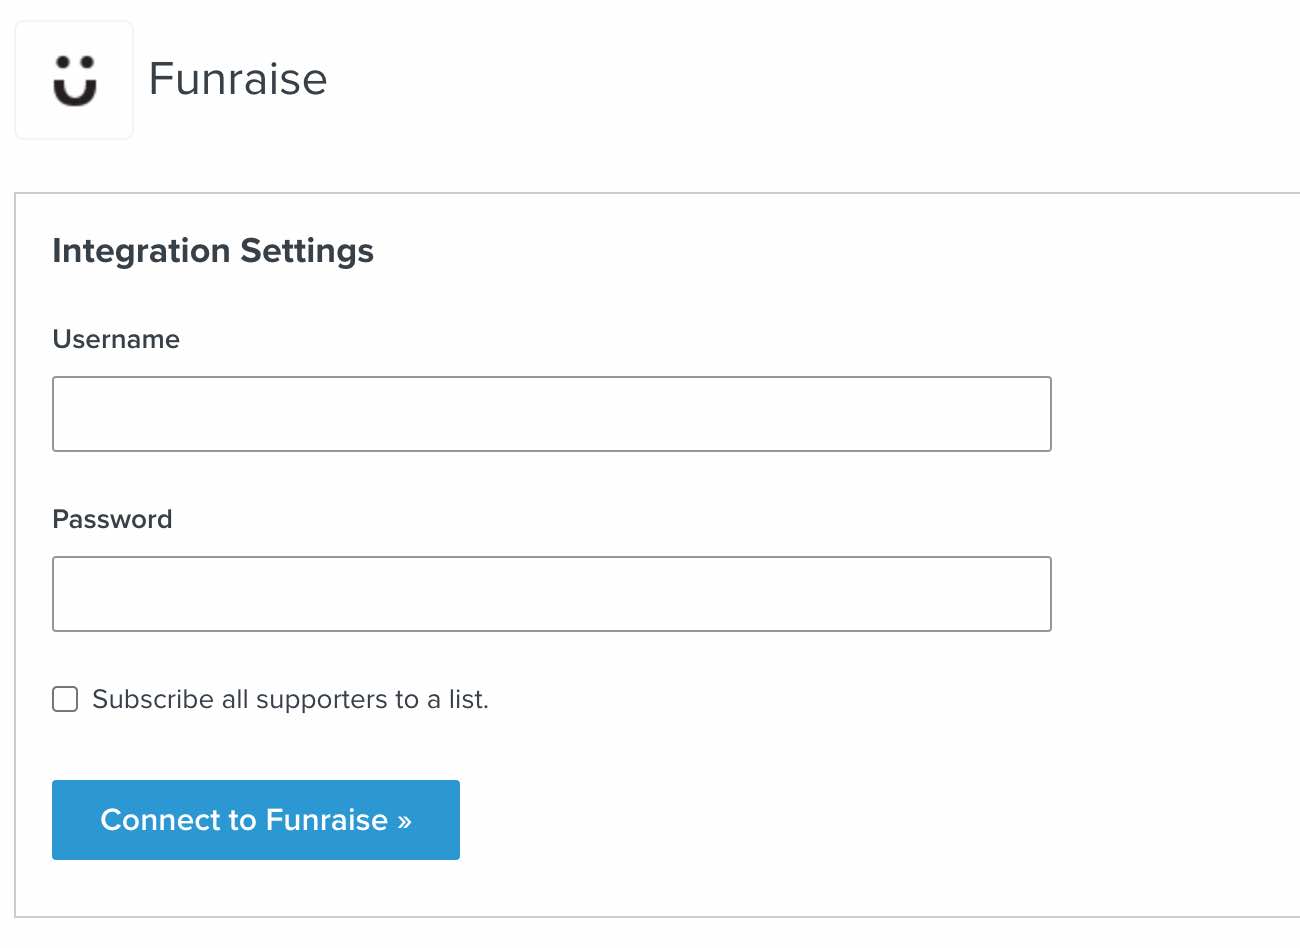 Funraise integration settings page in Klaviyo showing settings for Username, Password, Subscribe all supporters to a list, and Connect to Funraise button with blue background